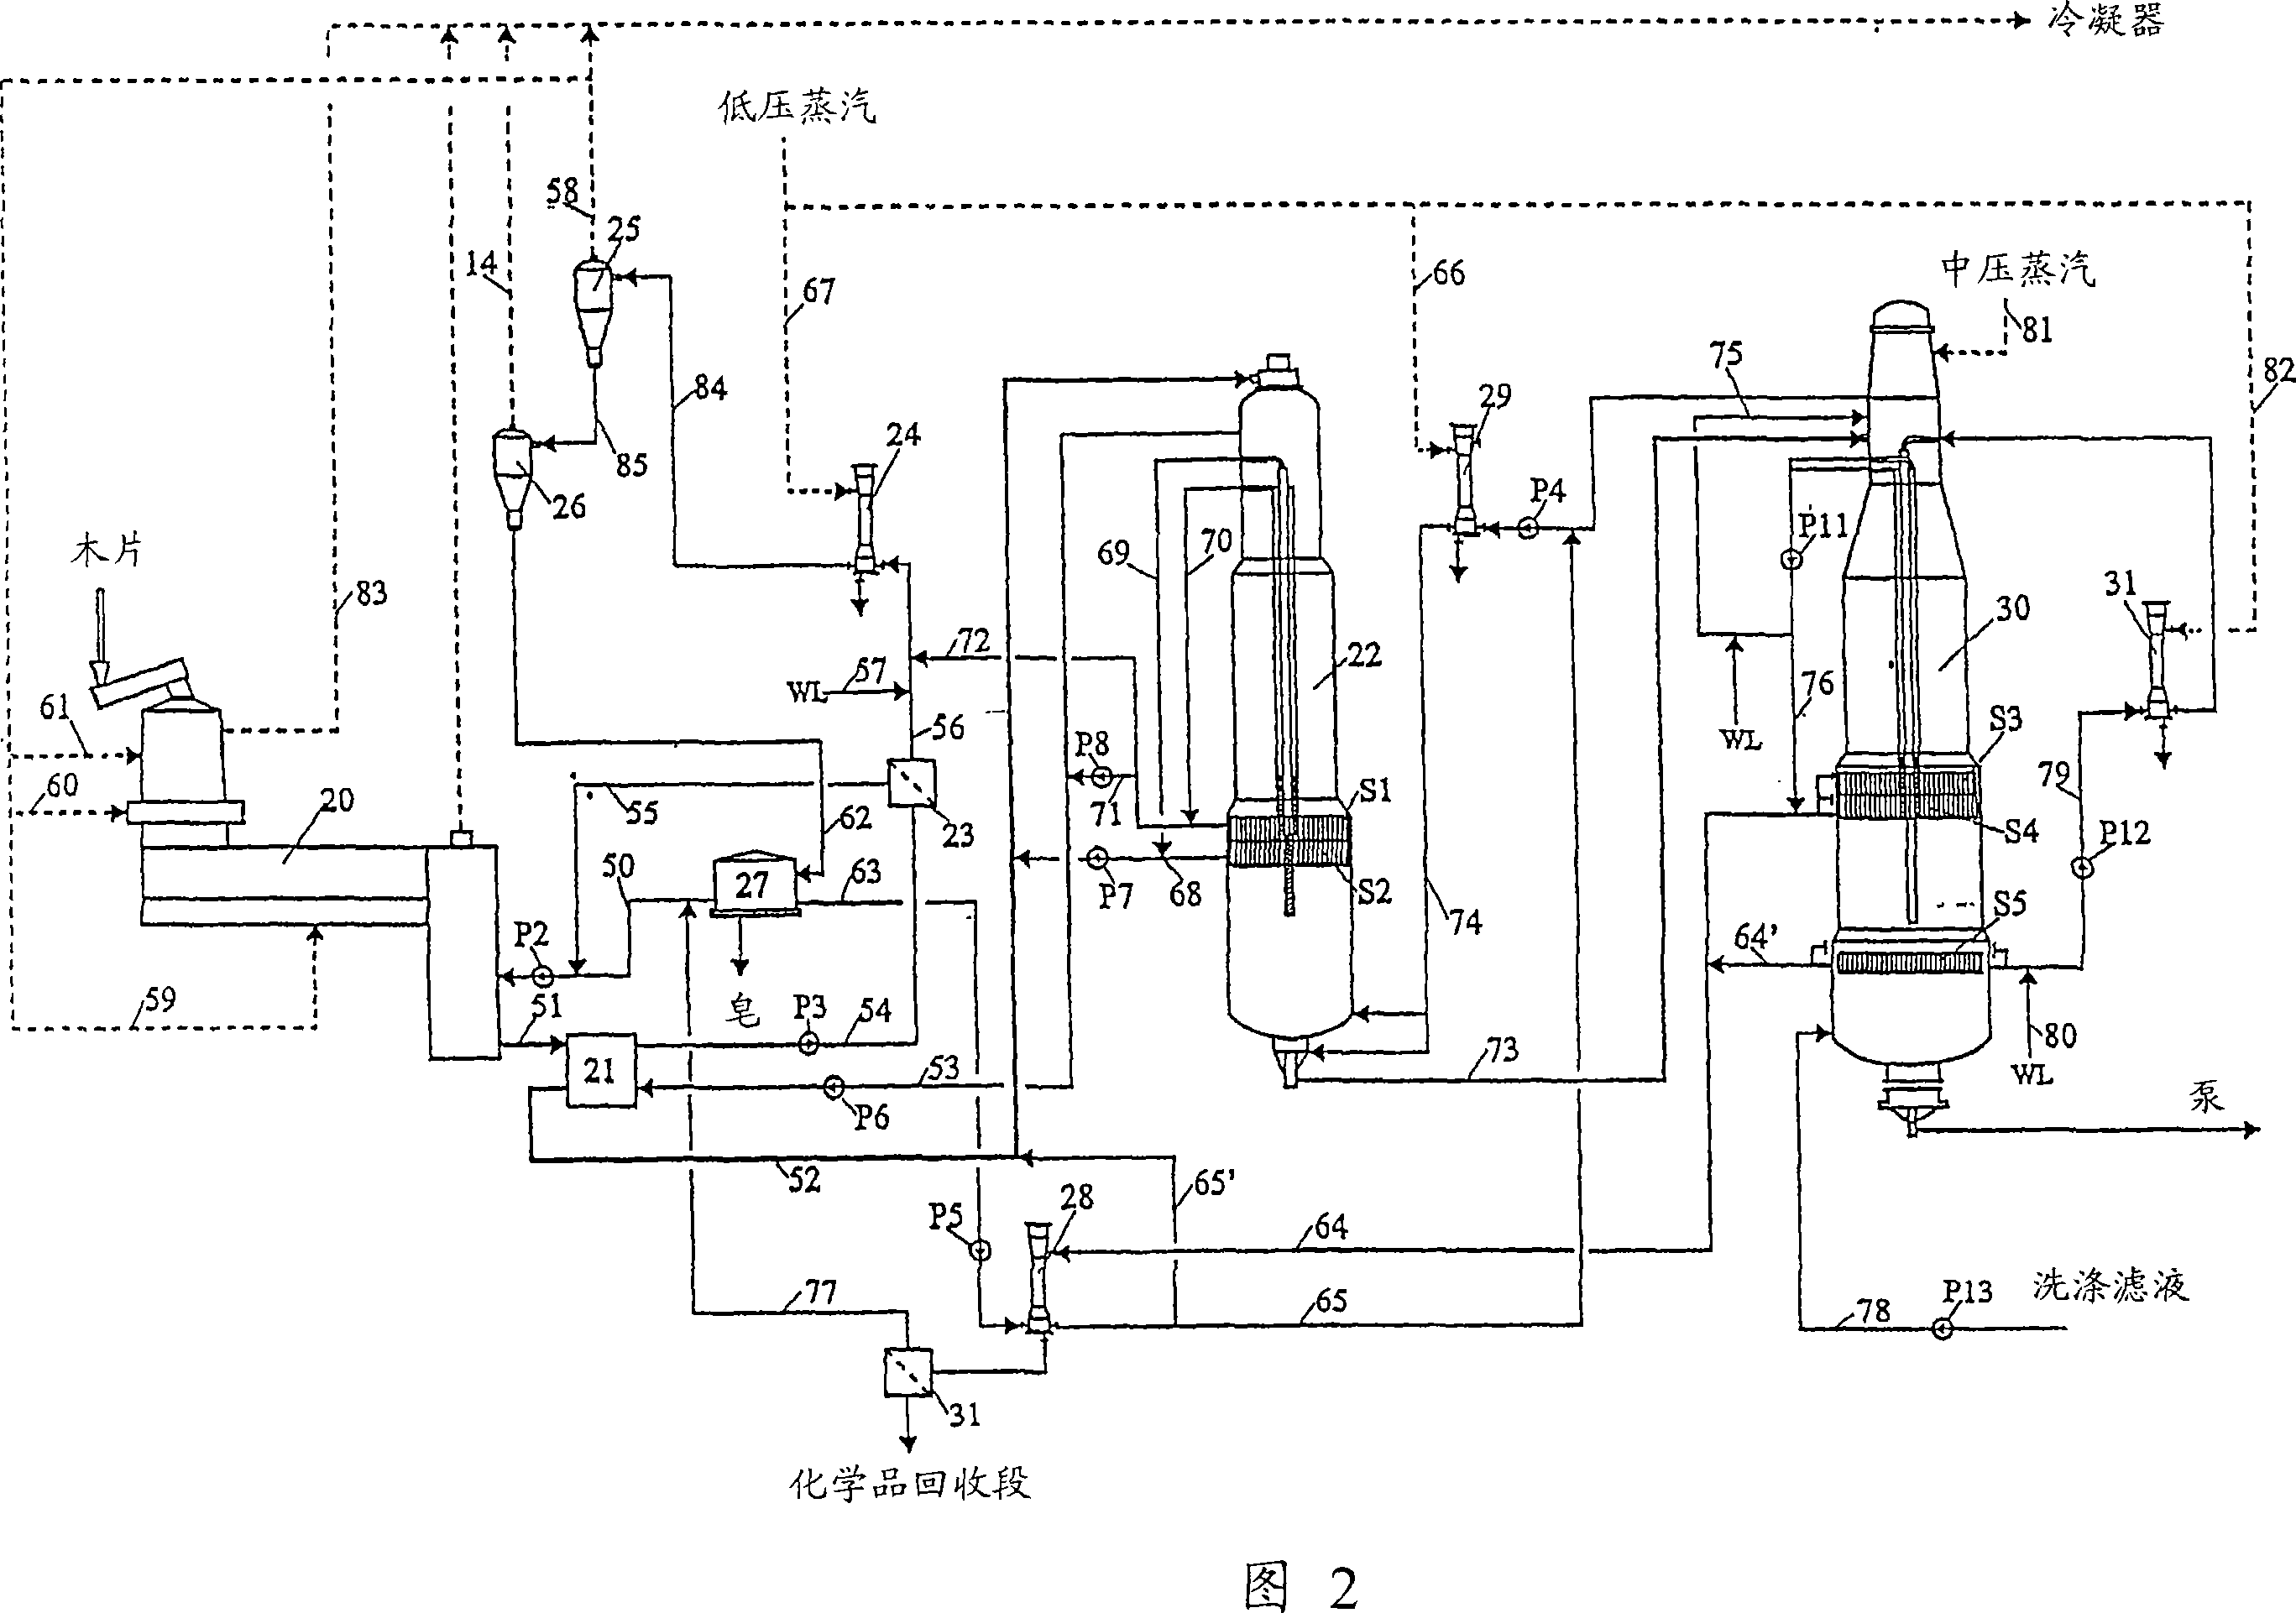 Alkaline process and system for producing pulp